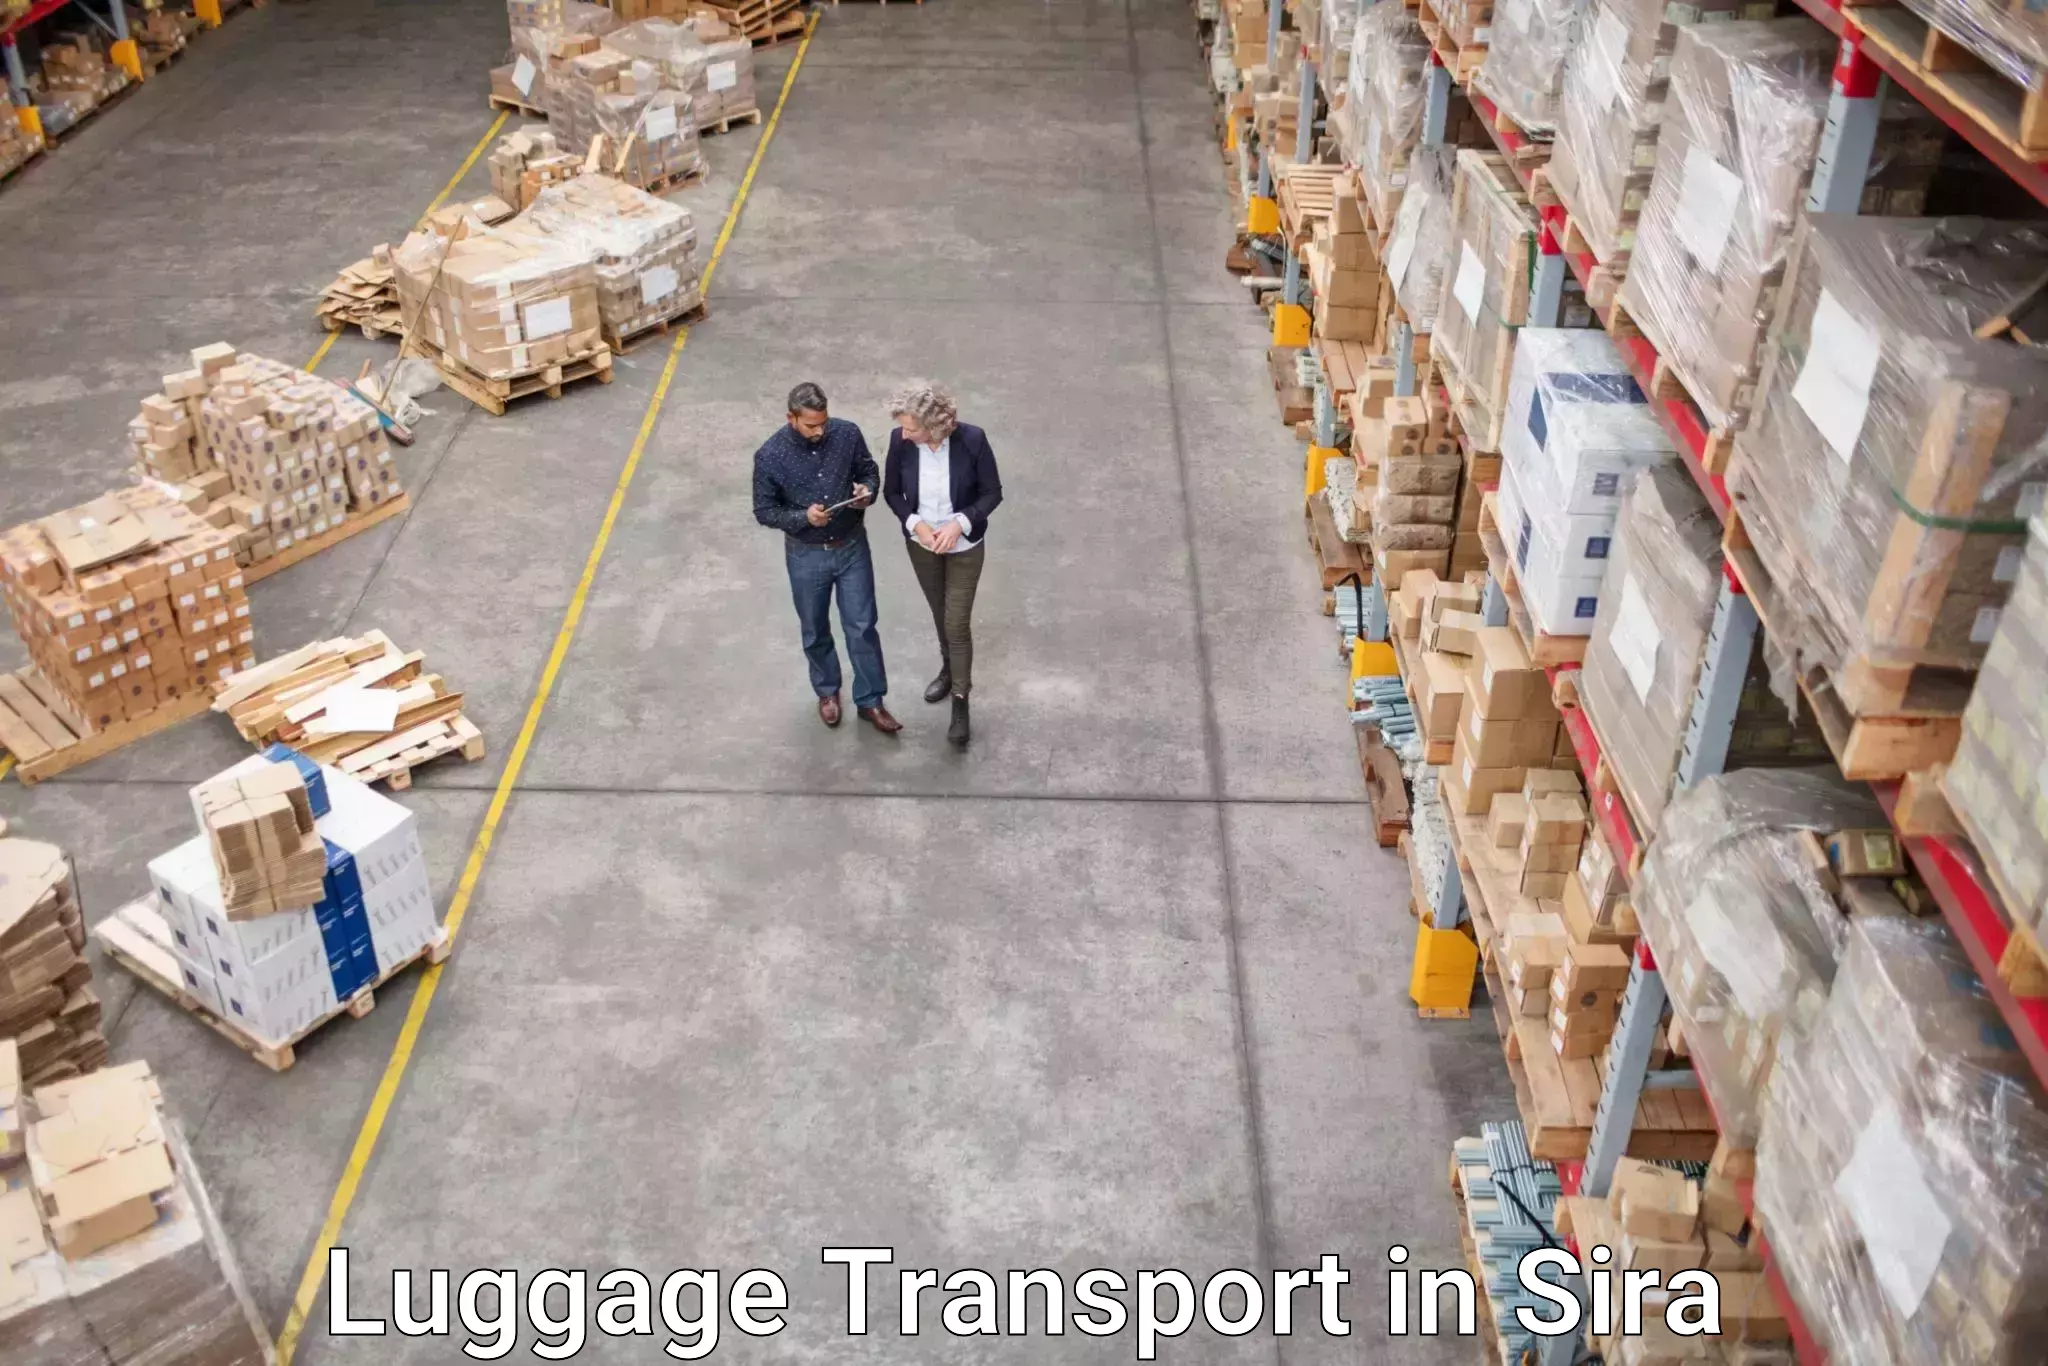 Baggage transport innovation in Sira